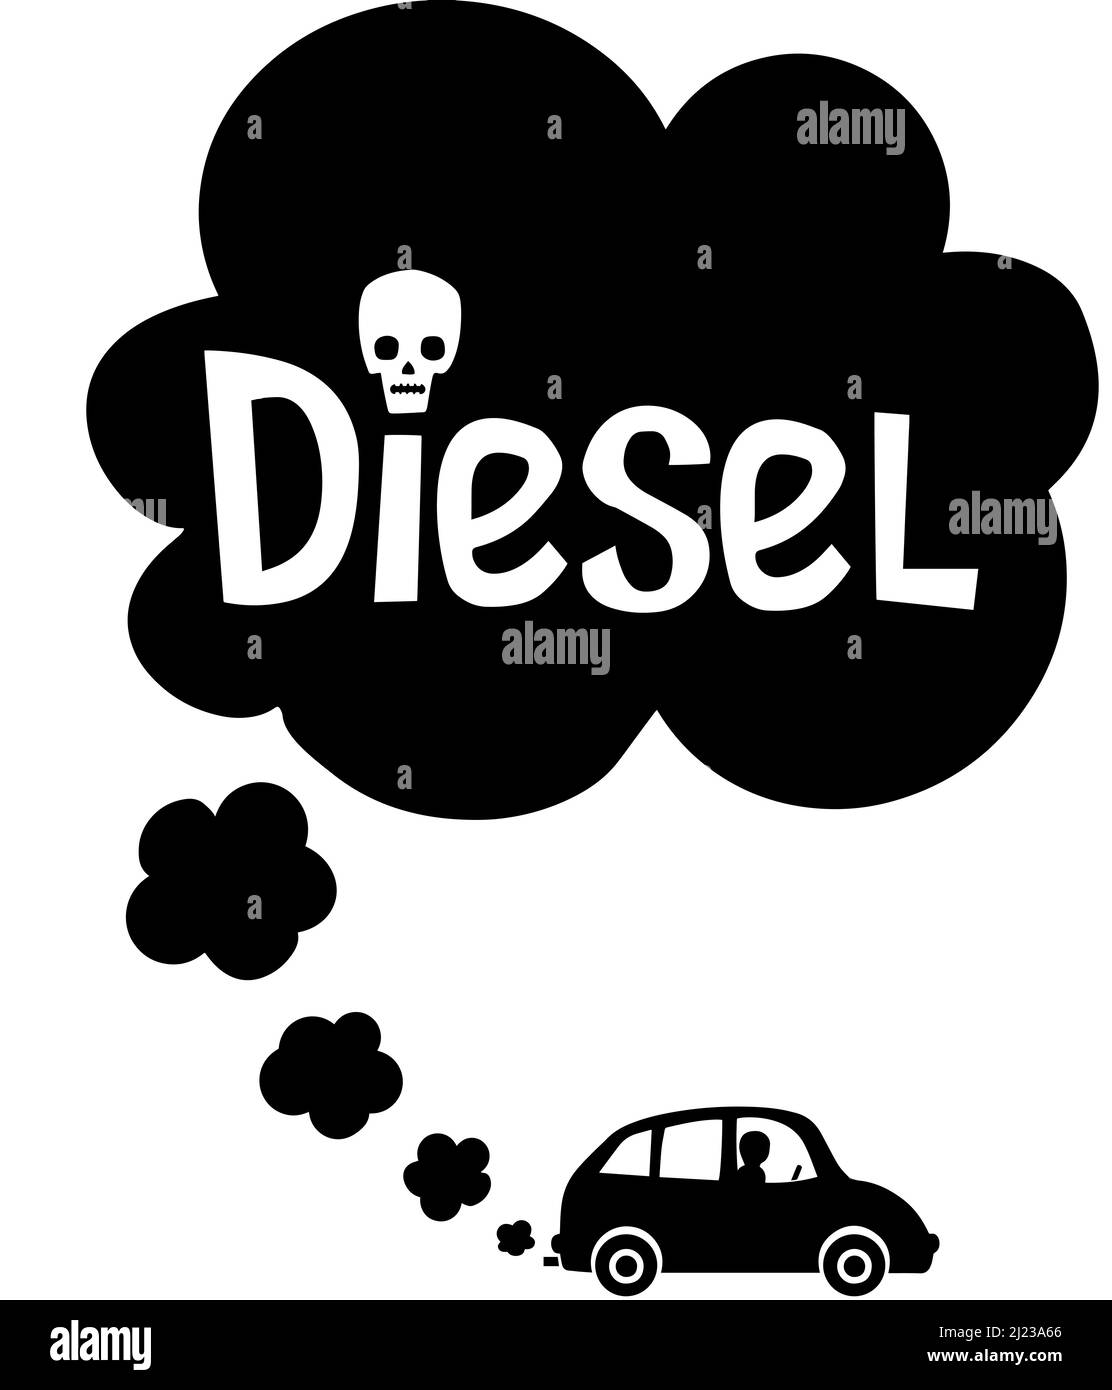 An illustration on the harmful effects of Diesel on health. Stock Photo